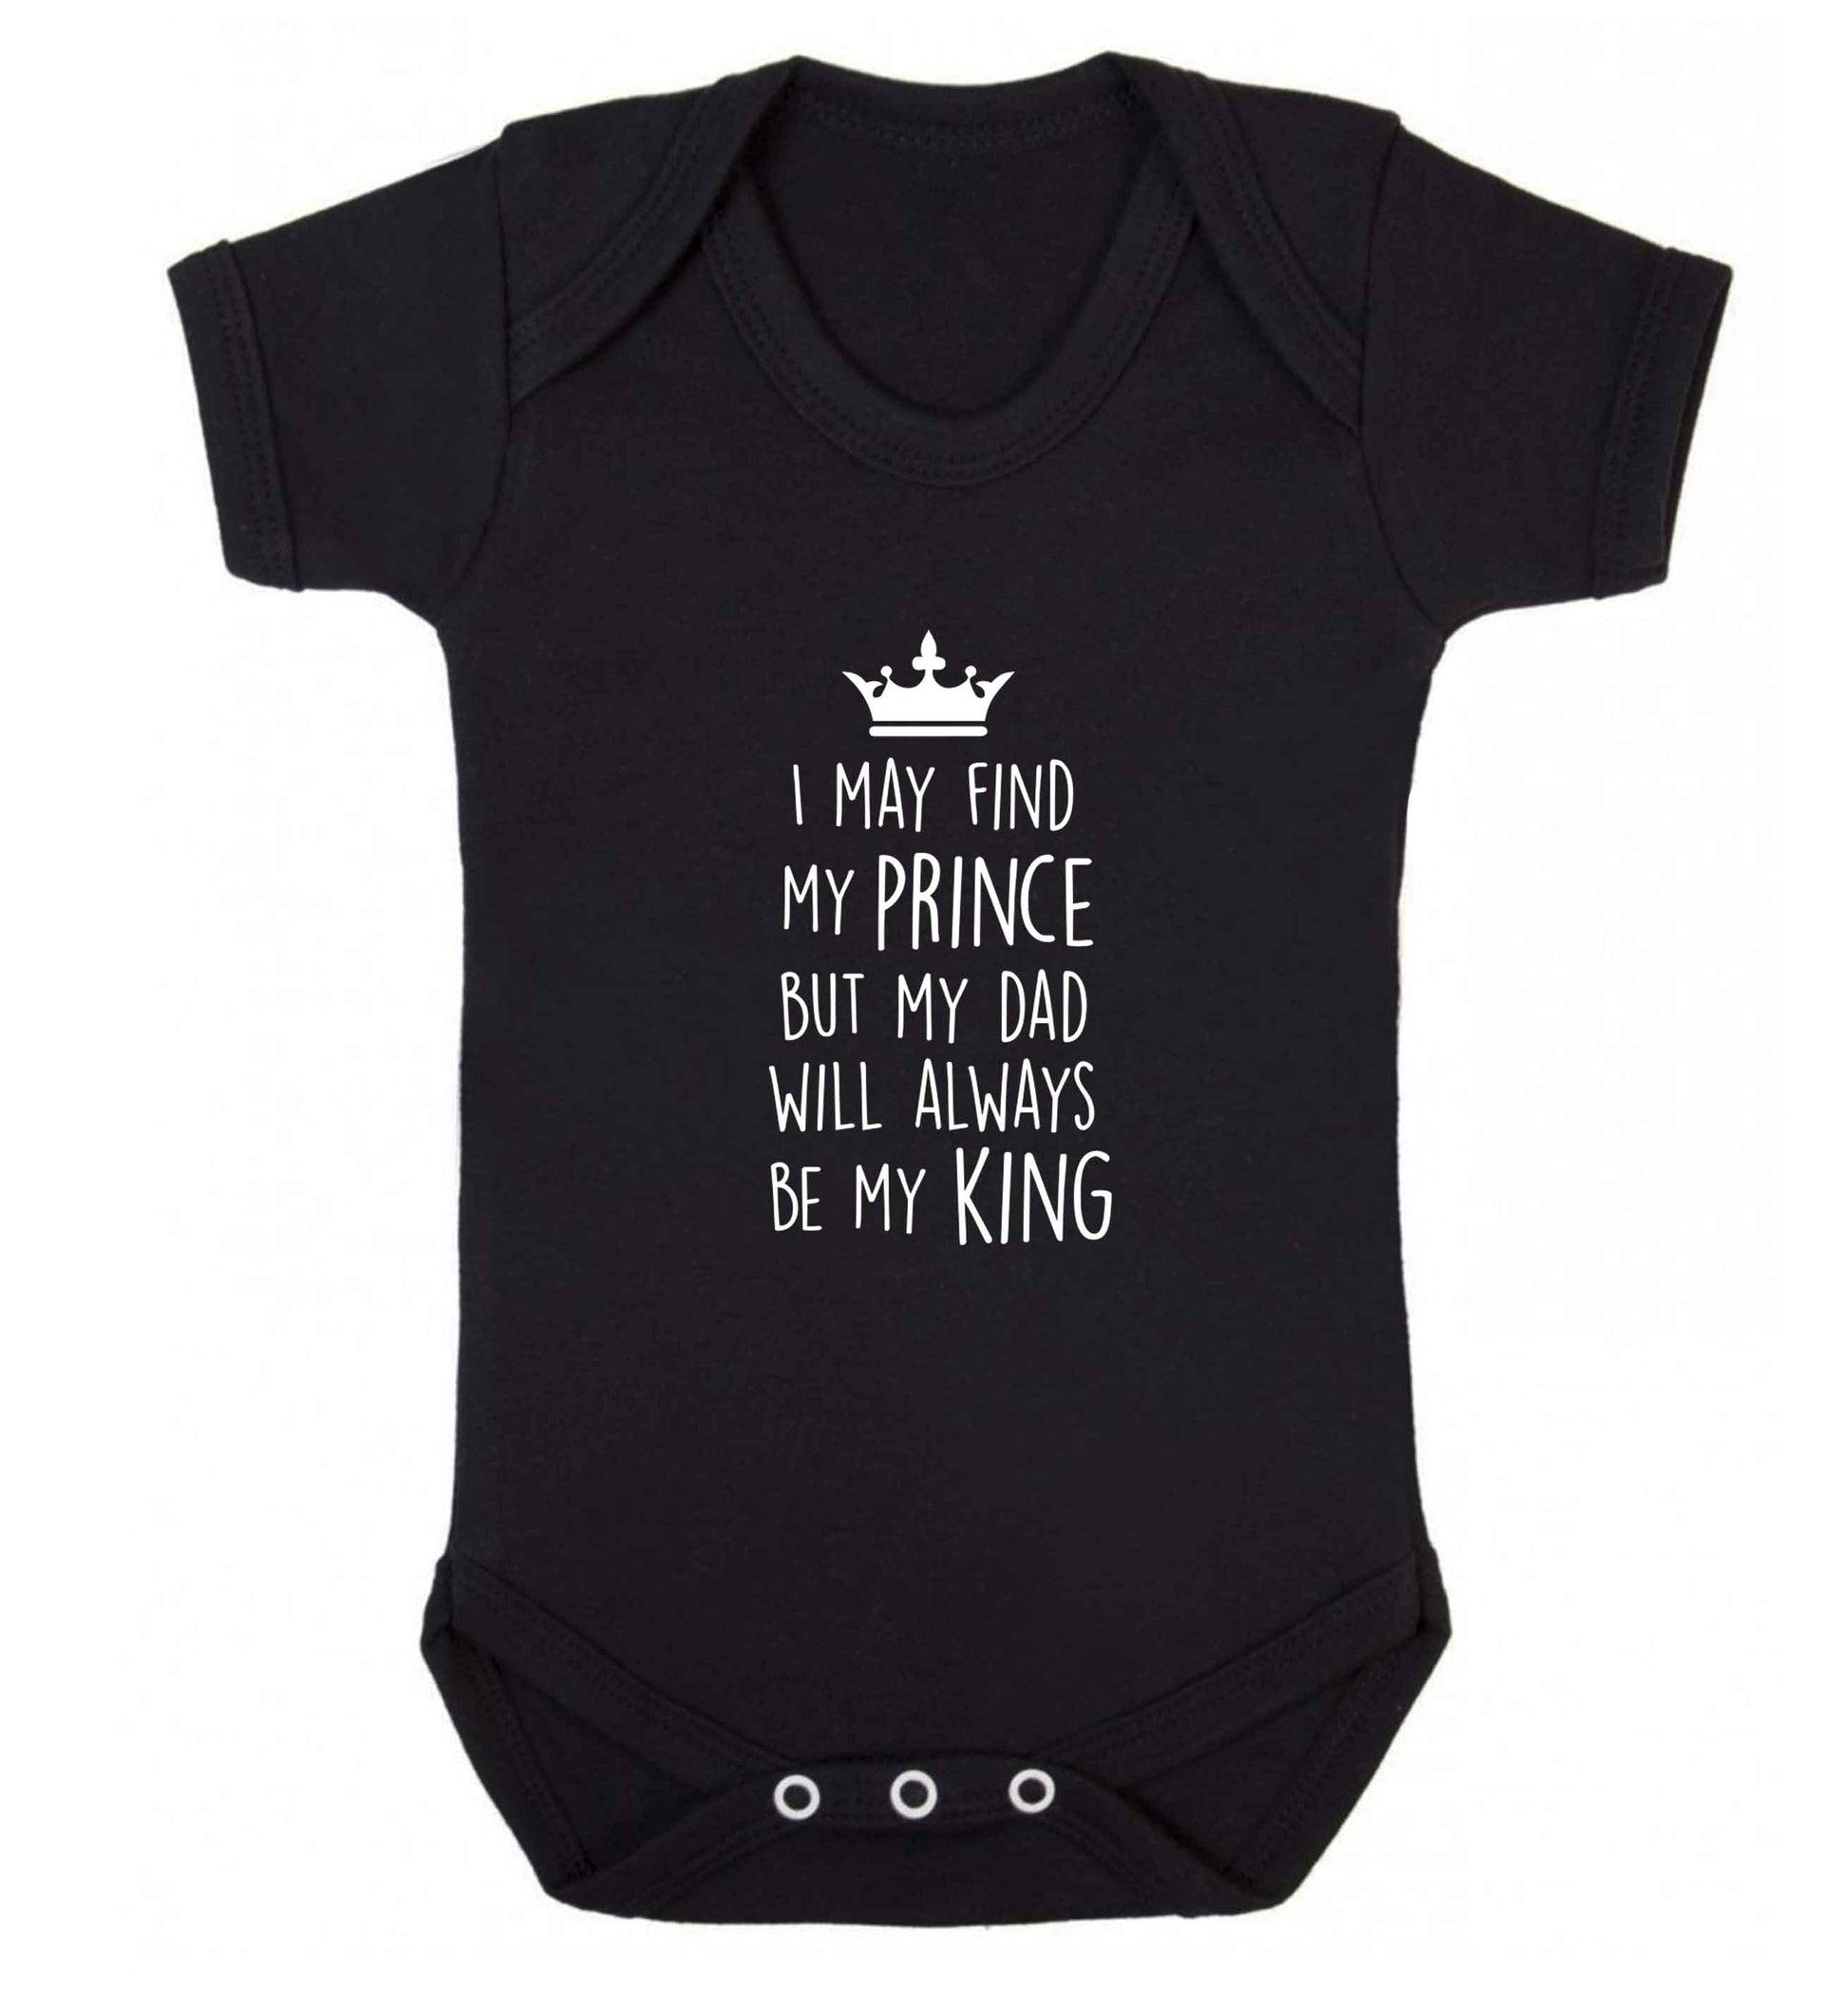 I may find my prince but my dad will always be my king baby vest black 18-24 months